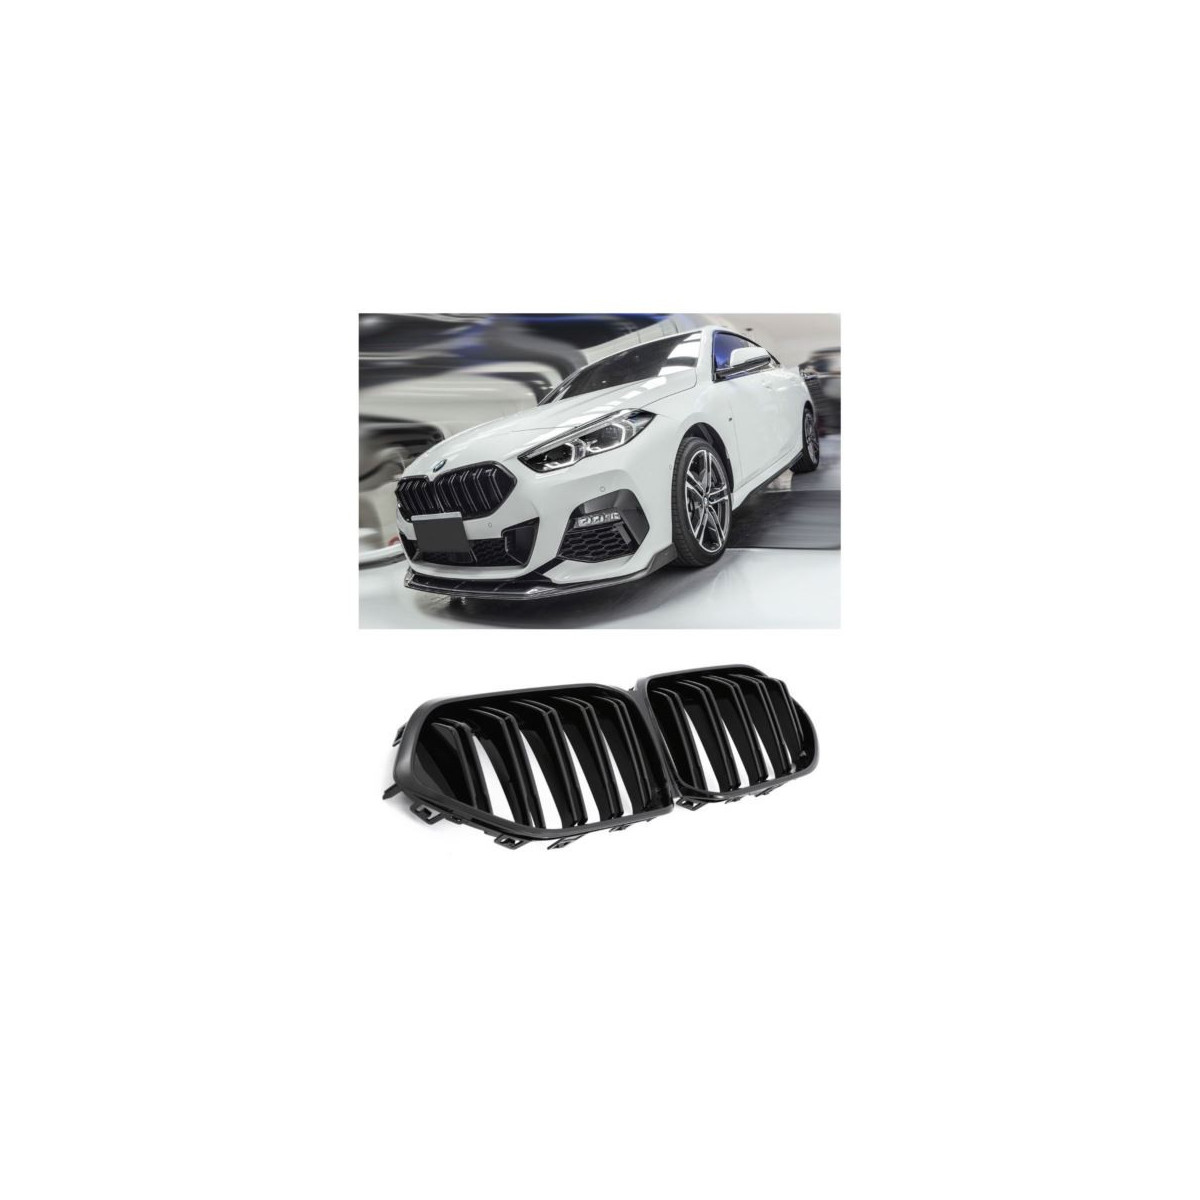 GRILL NERKI BMW F44 GRAND COUPE DOUBLE GLOSSY BLK.